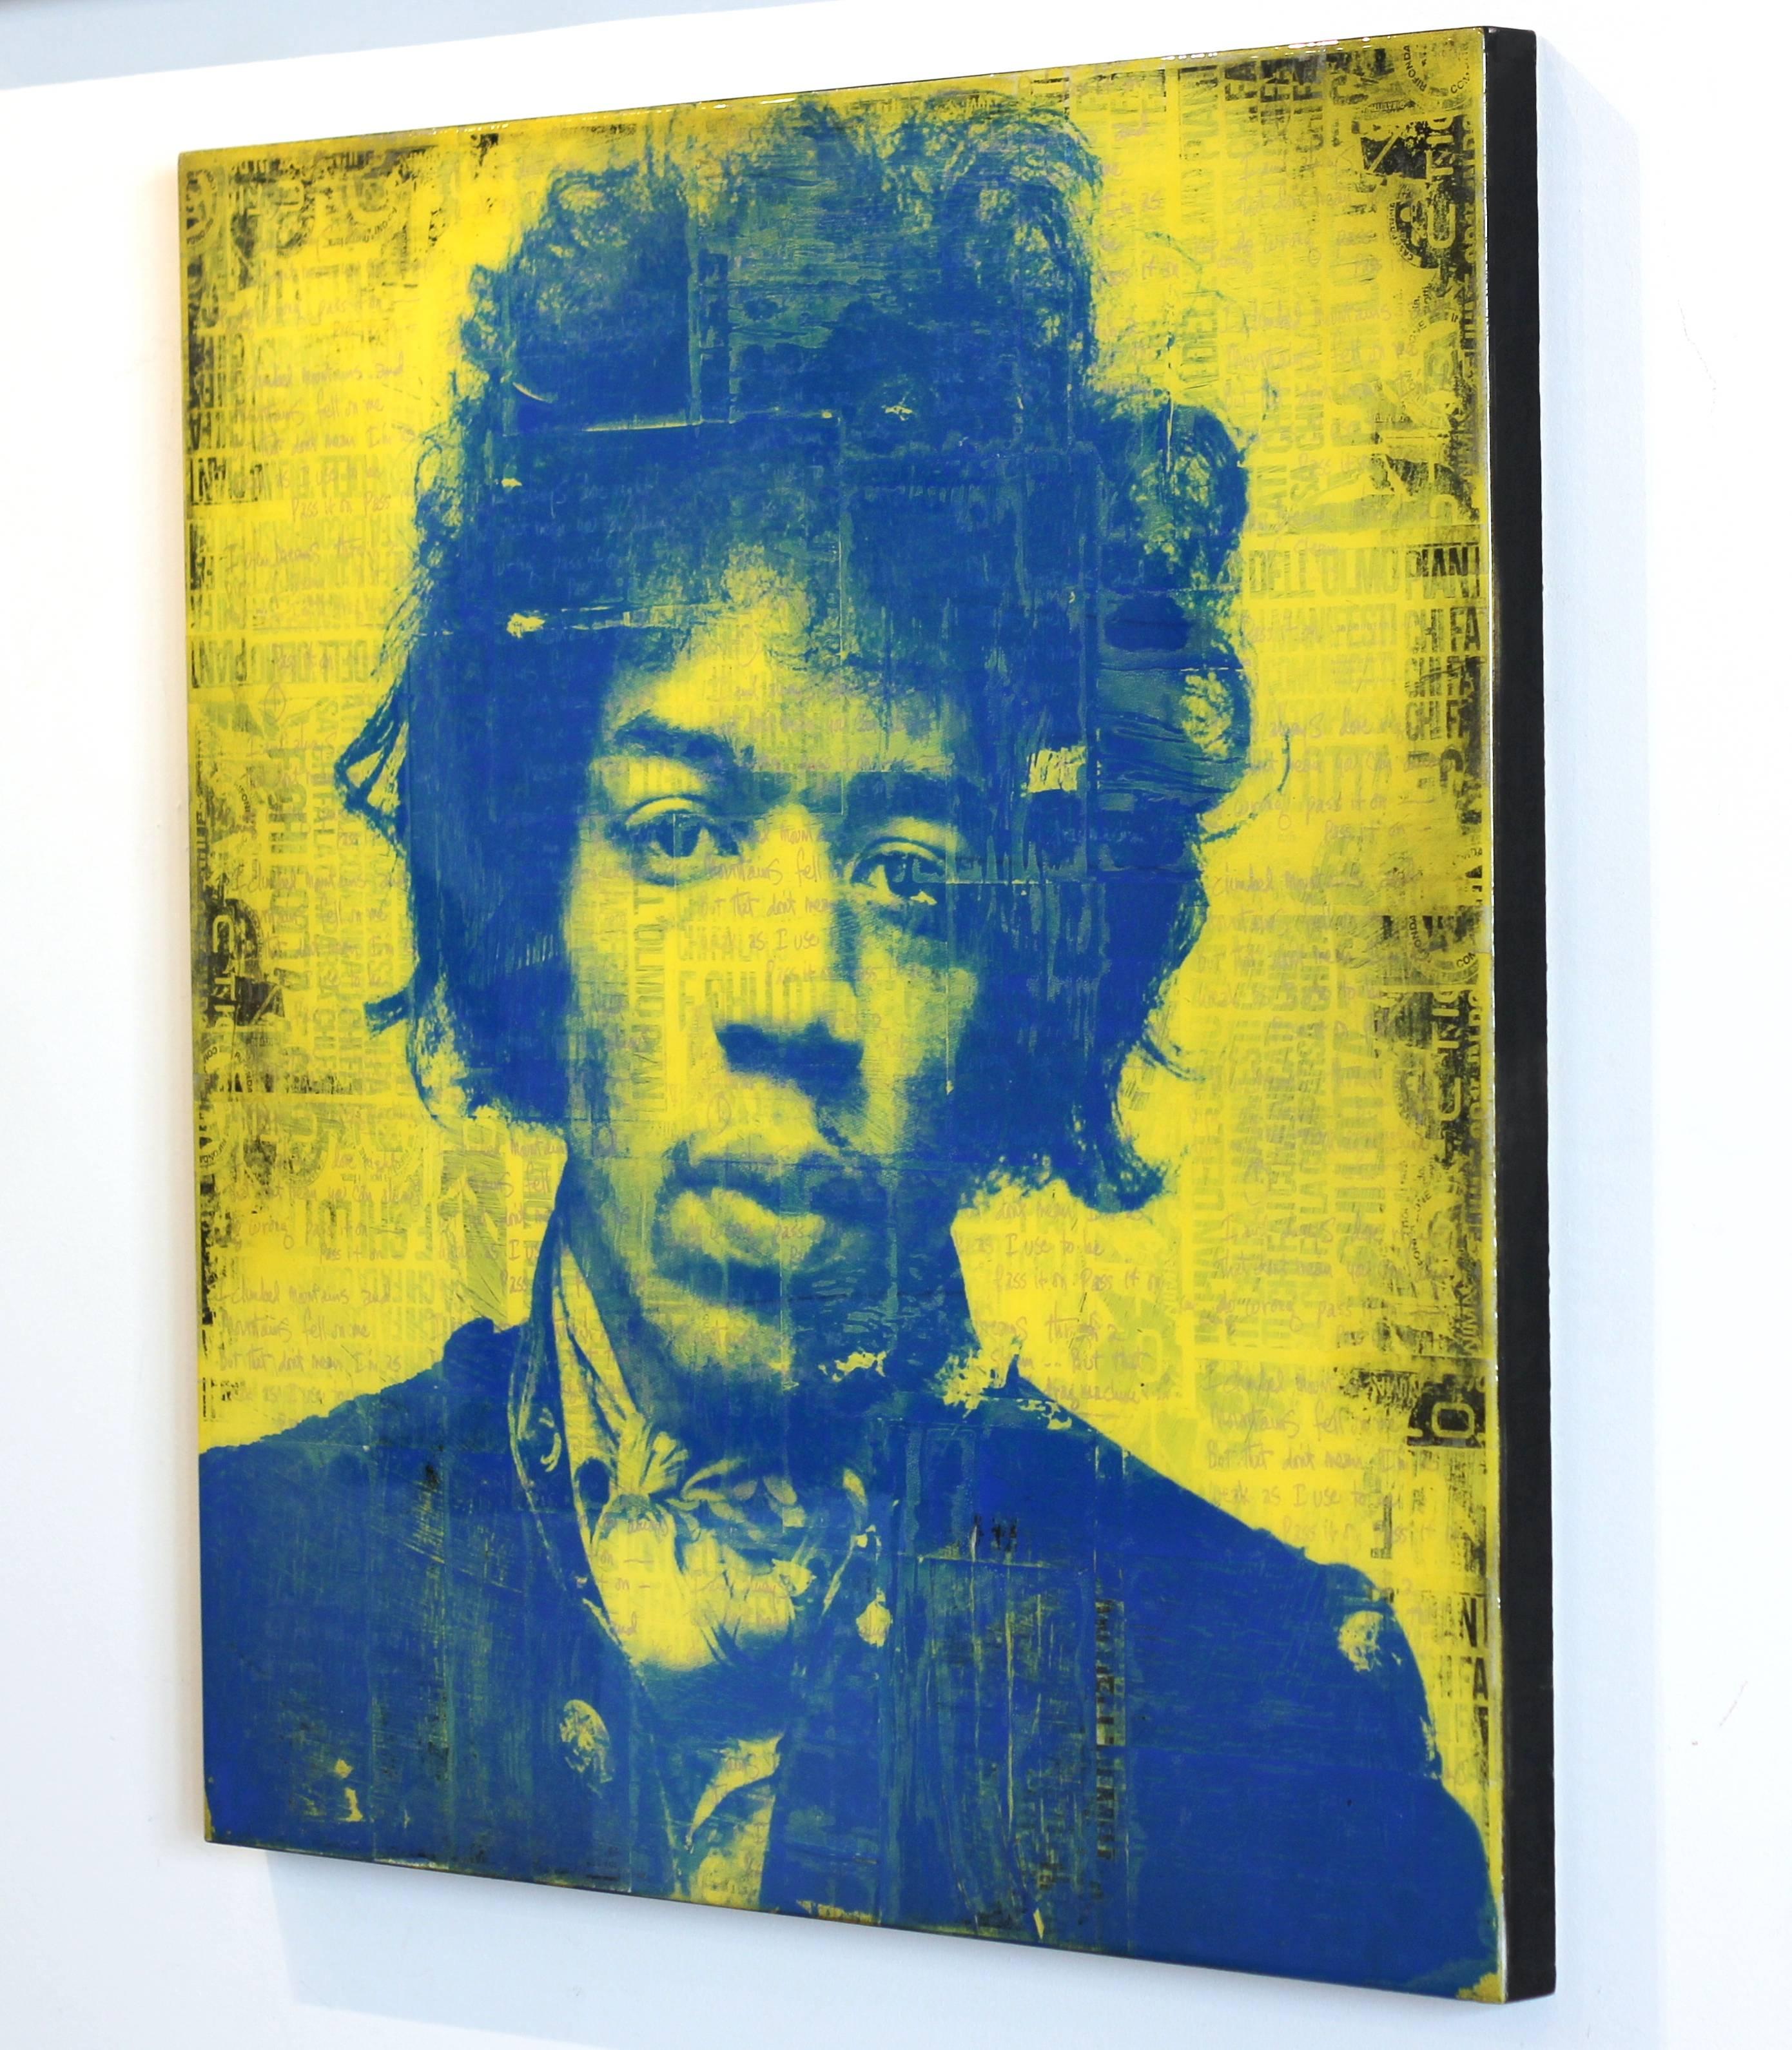 Jimi was a Rockstar Yellow - Brown Portrait Painting by Ashleigh Sumner